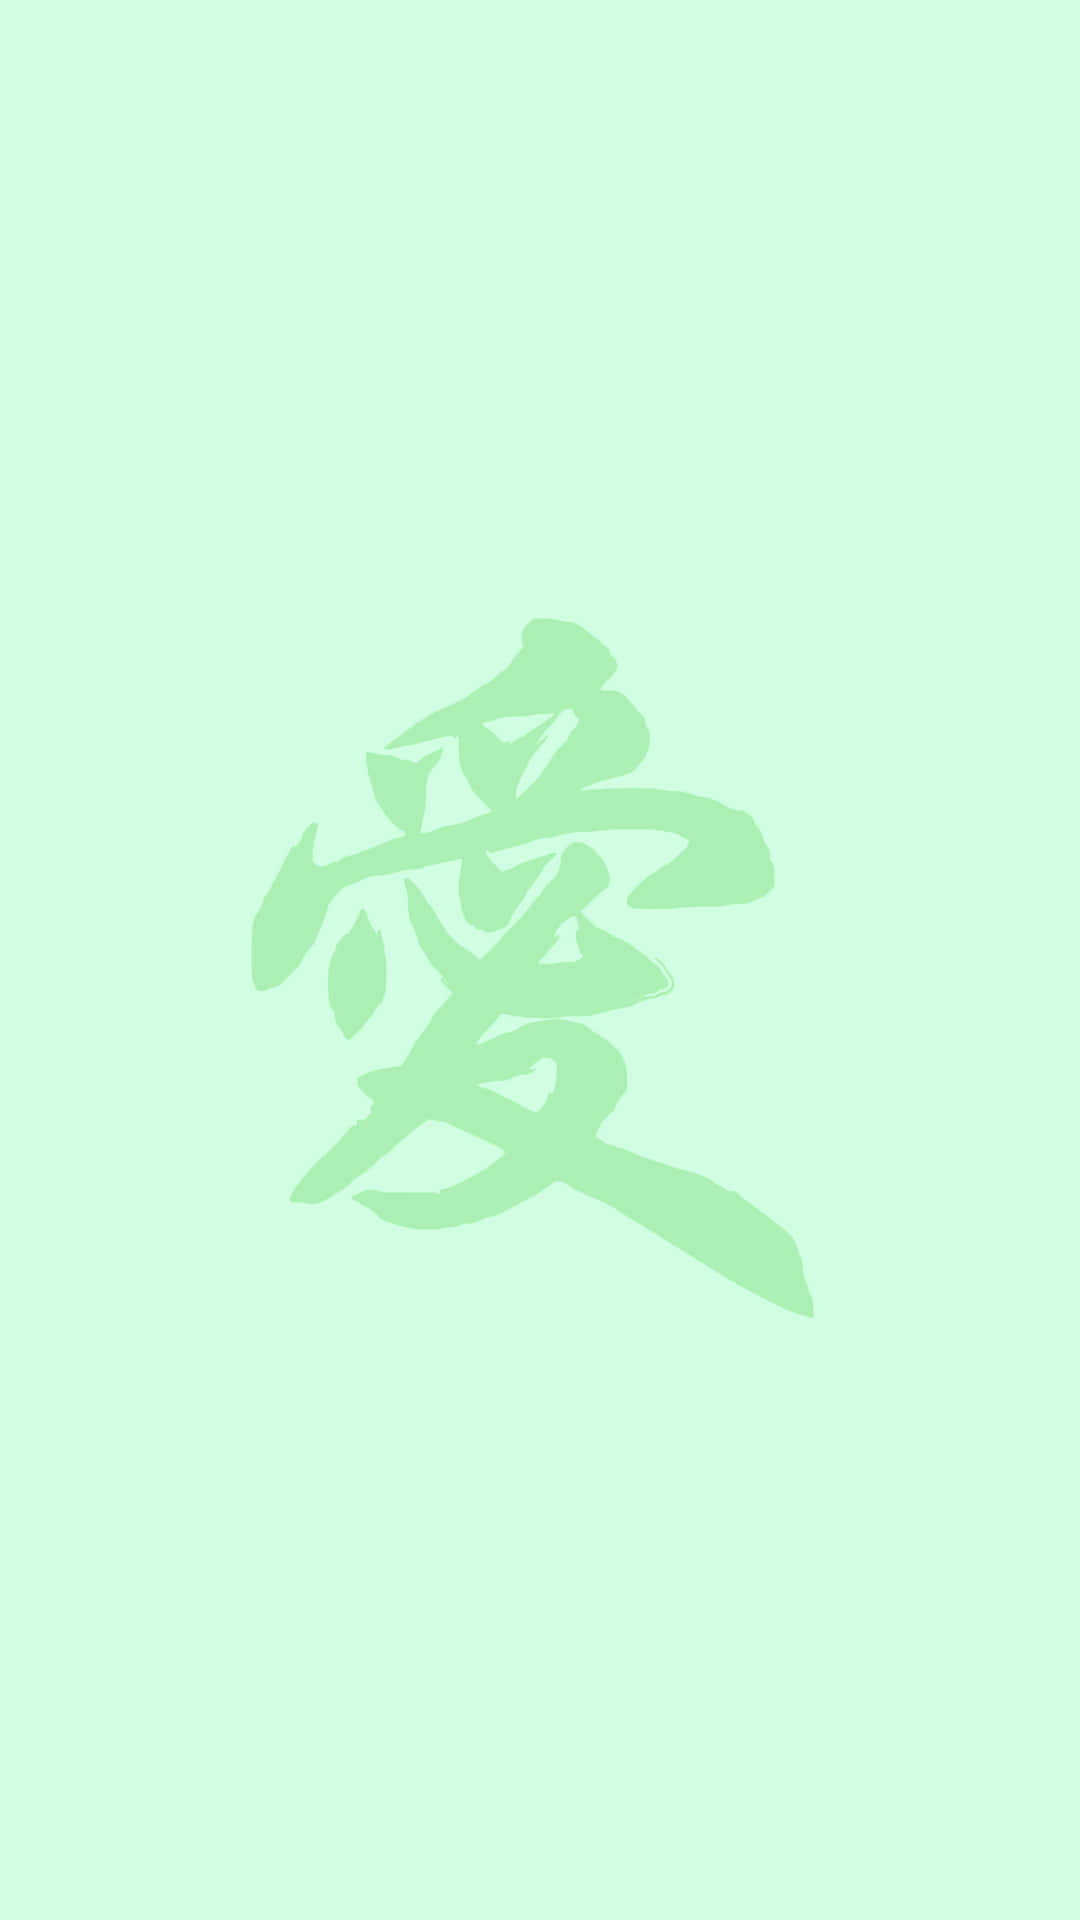 Chinese Calligraphy Art Simplicity Wallpaper